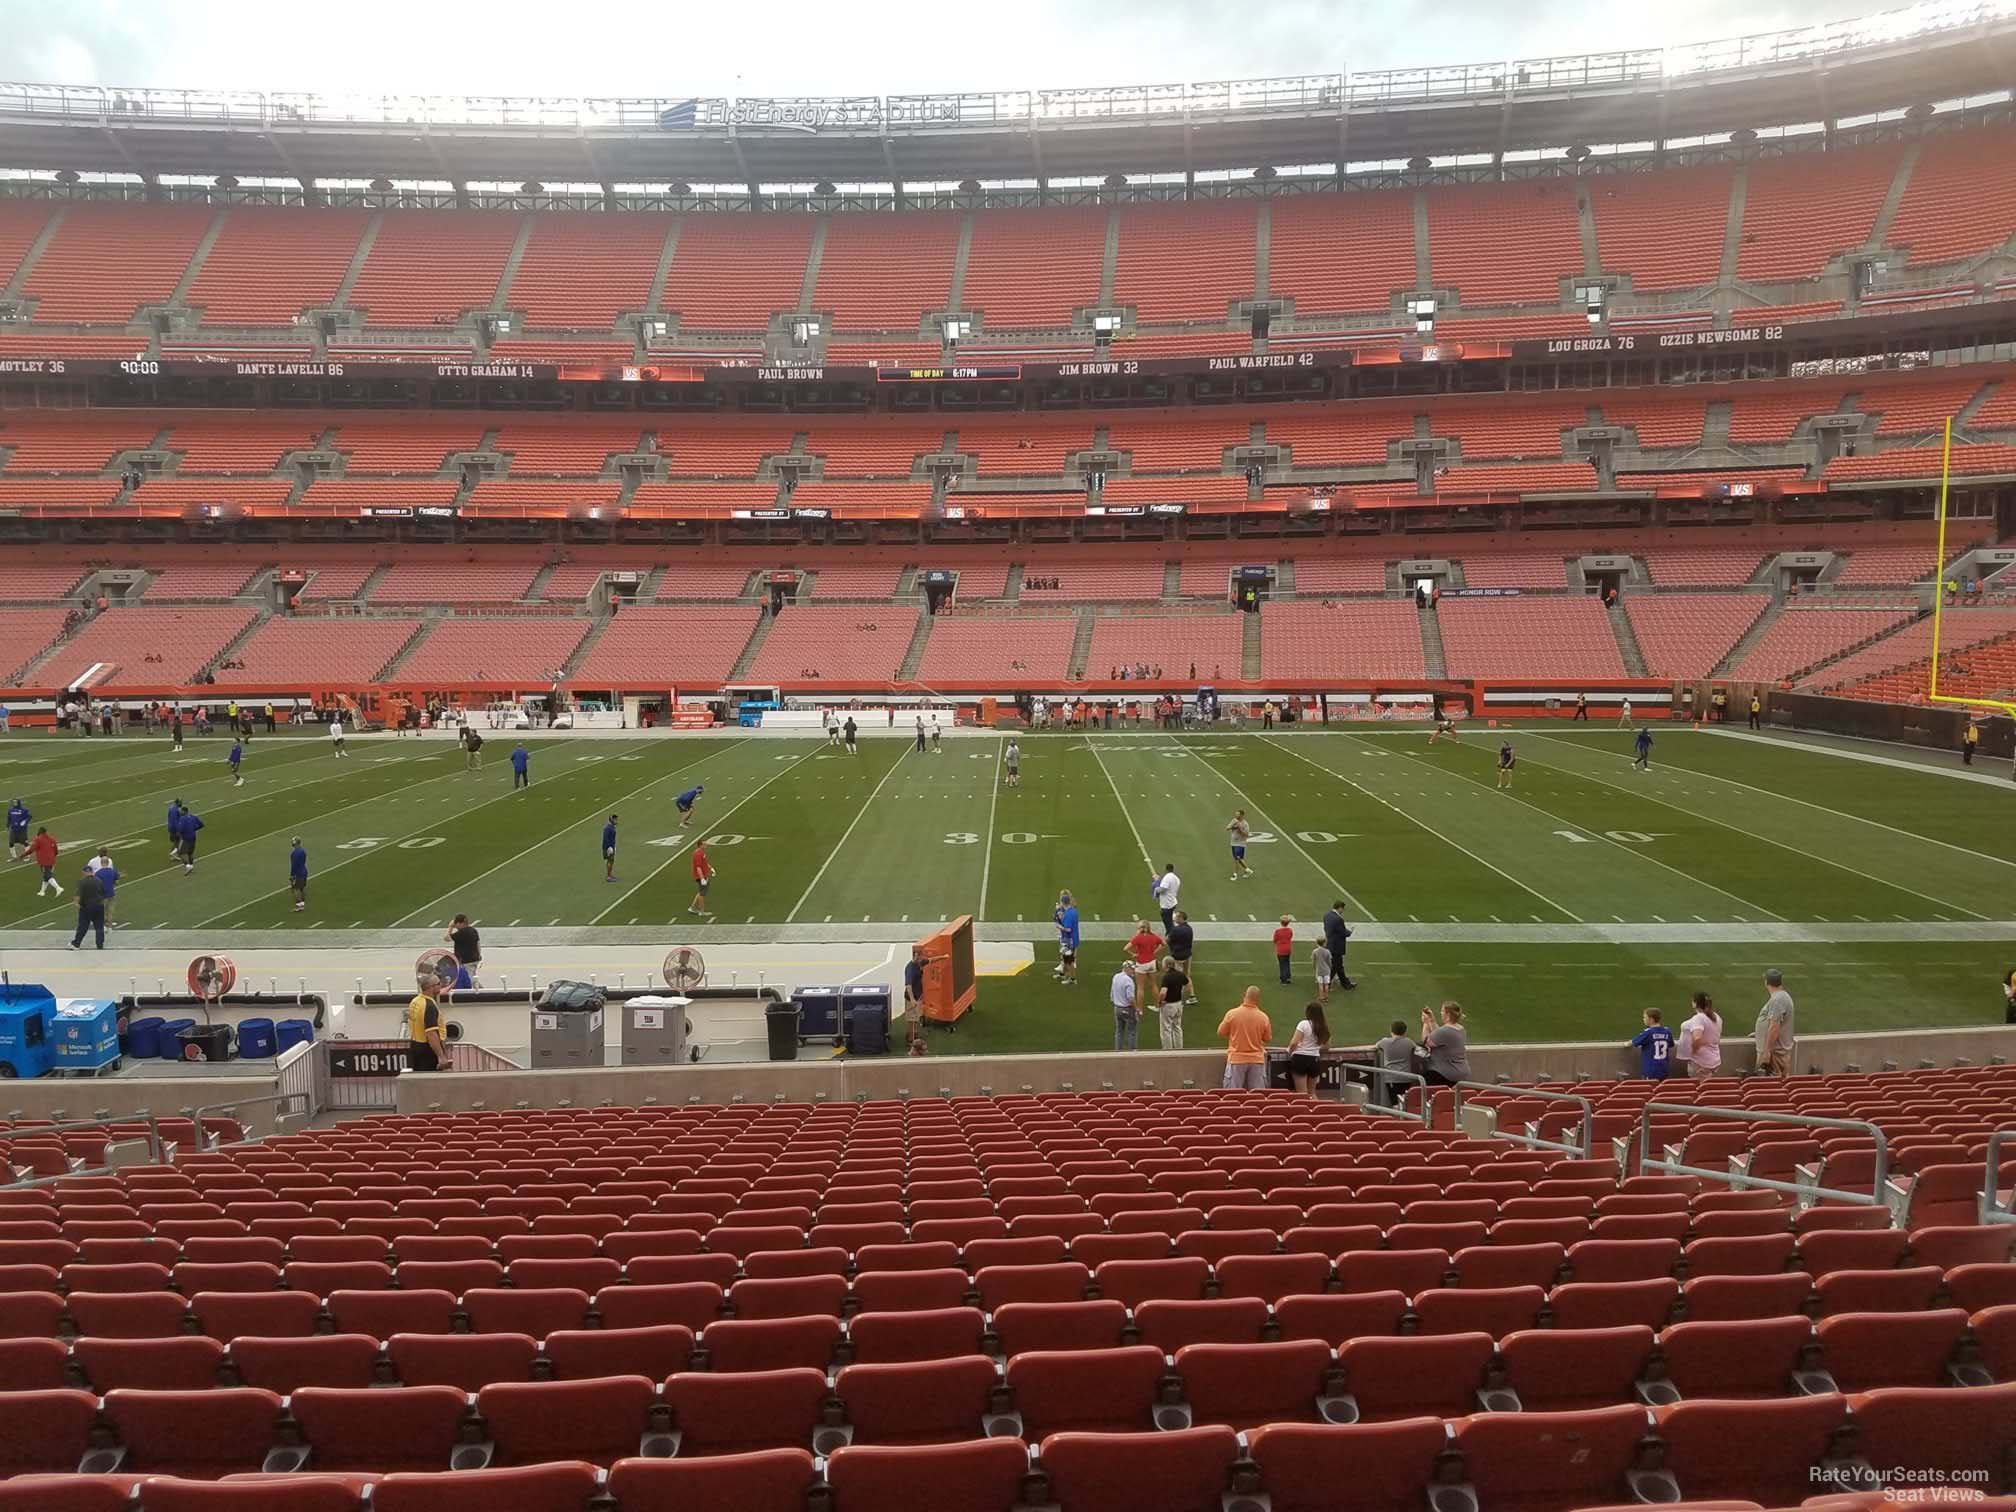 section 110, row 22 seat view  - cleveland browns stadium